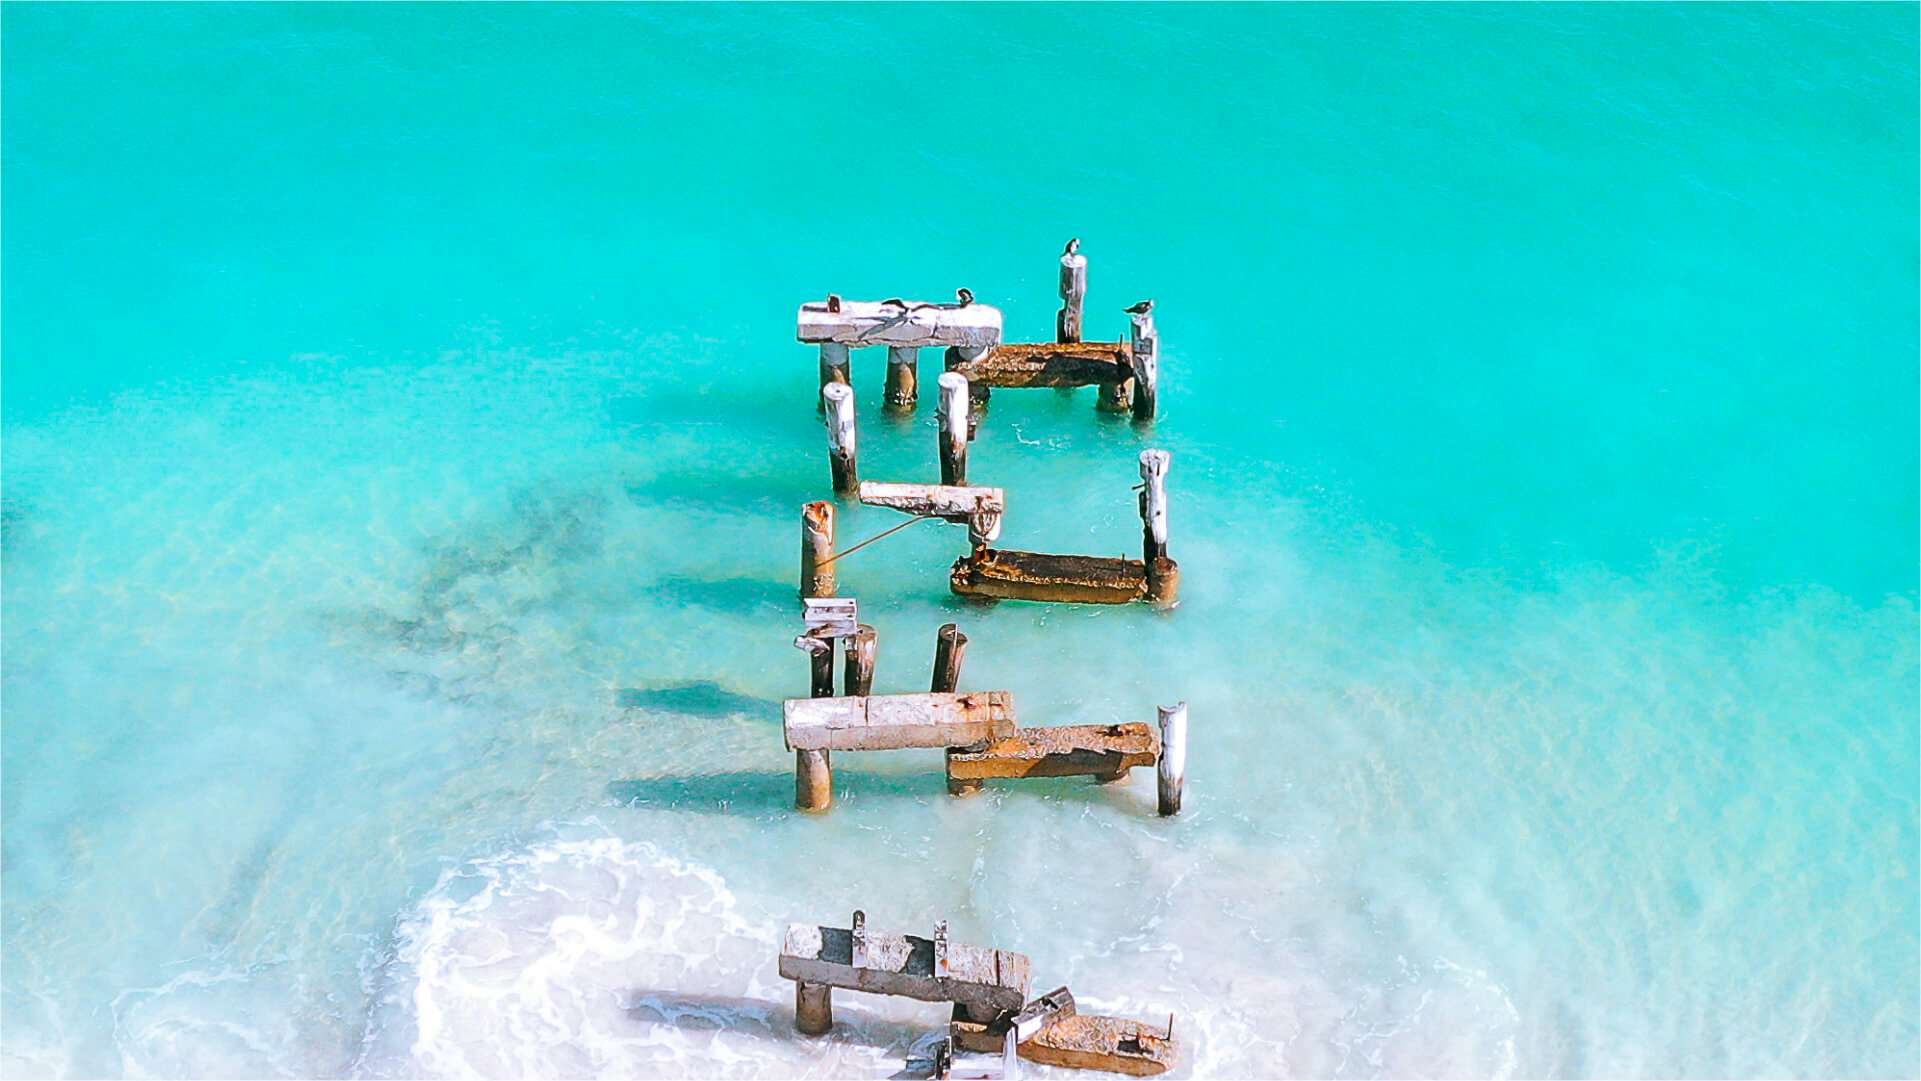 Remains of an old jetty in turquoise waters.